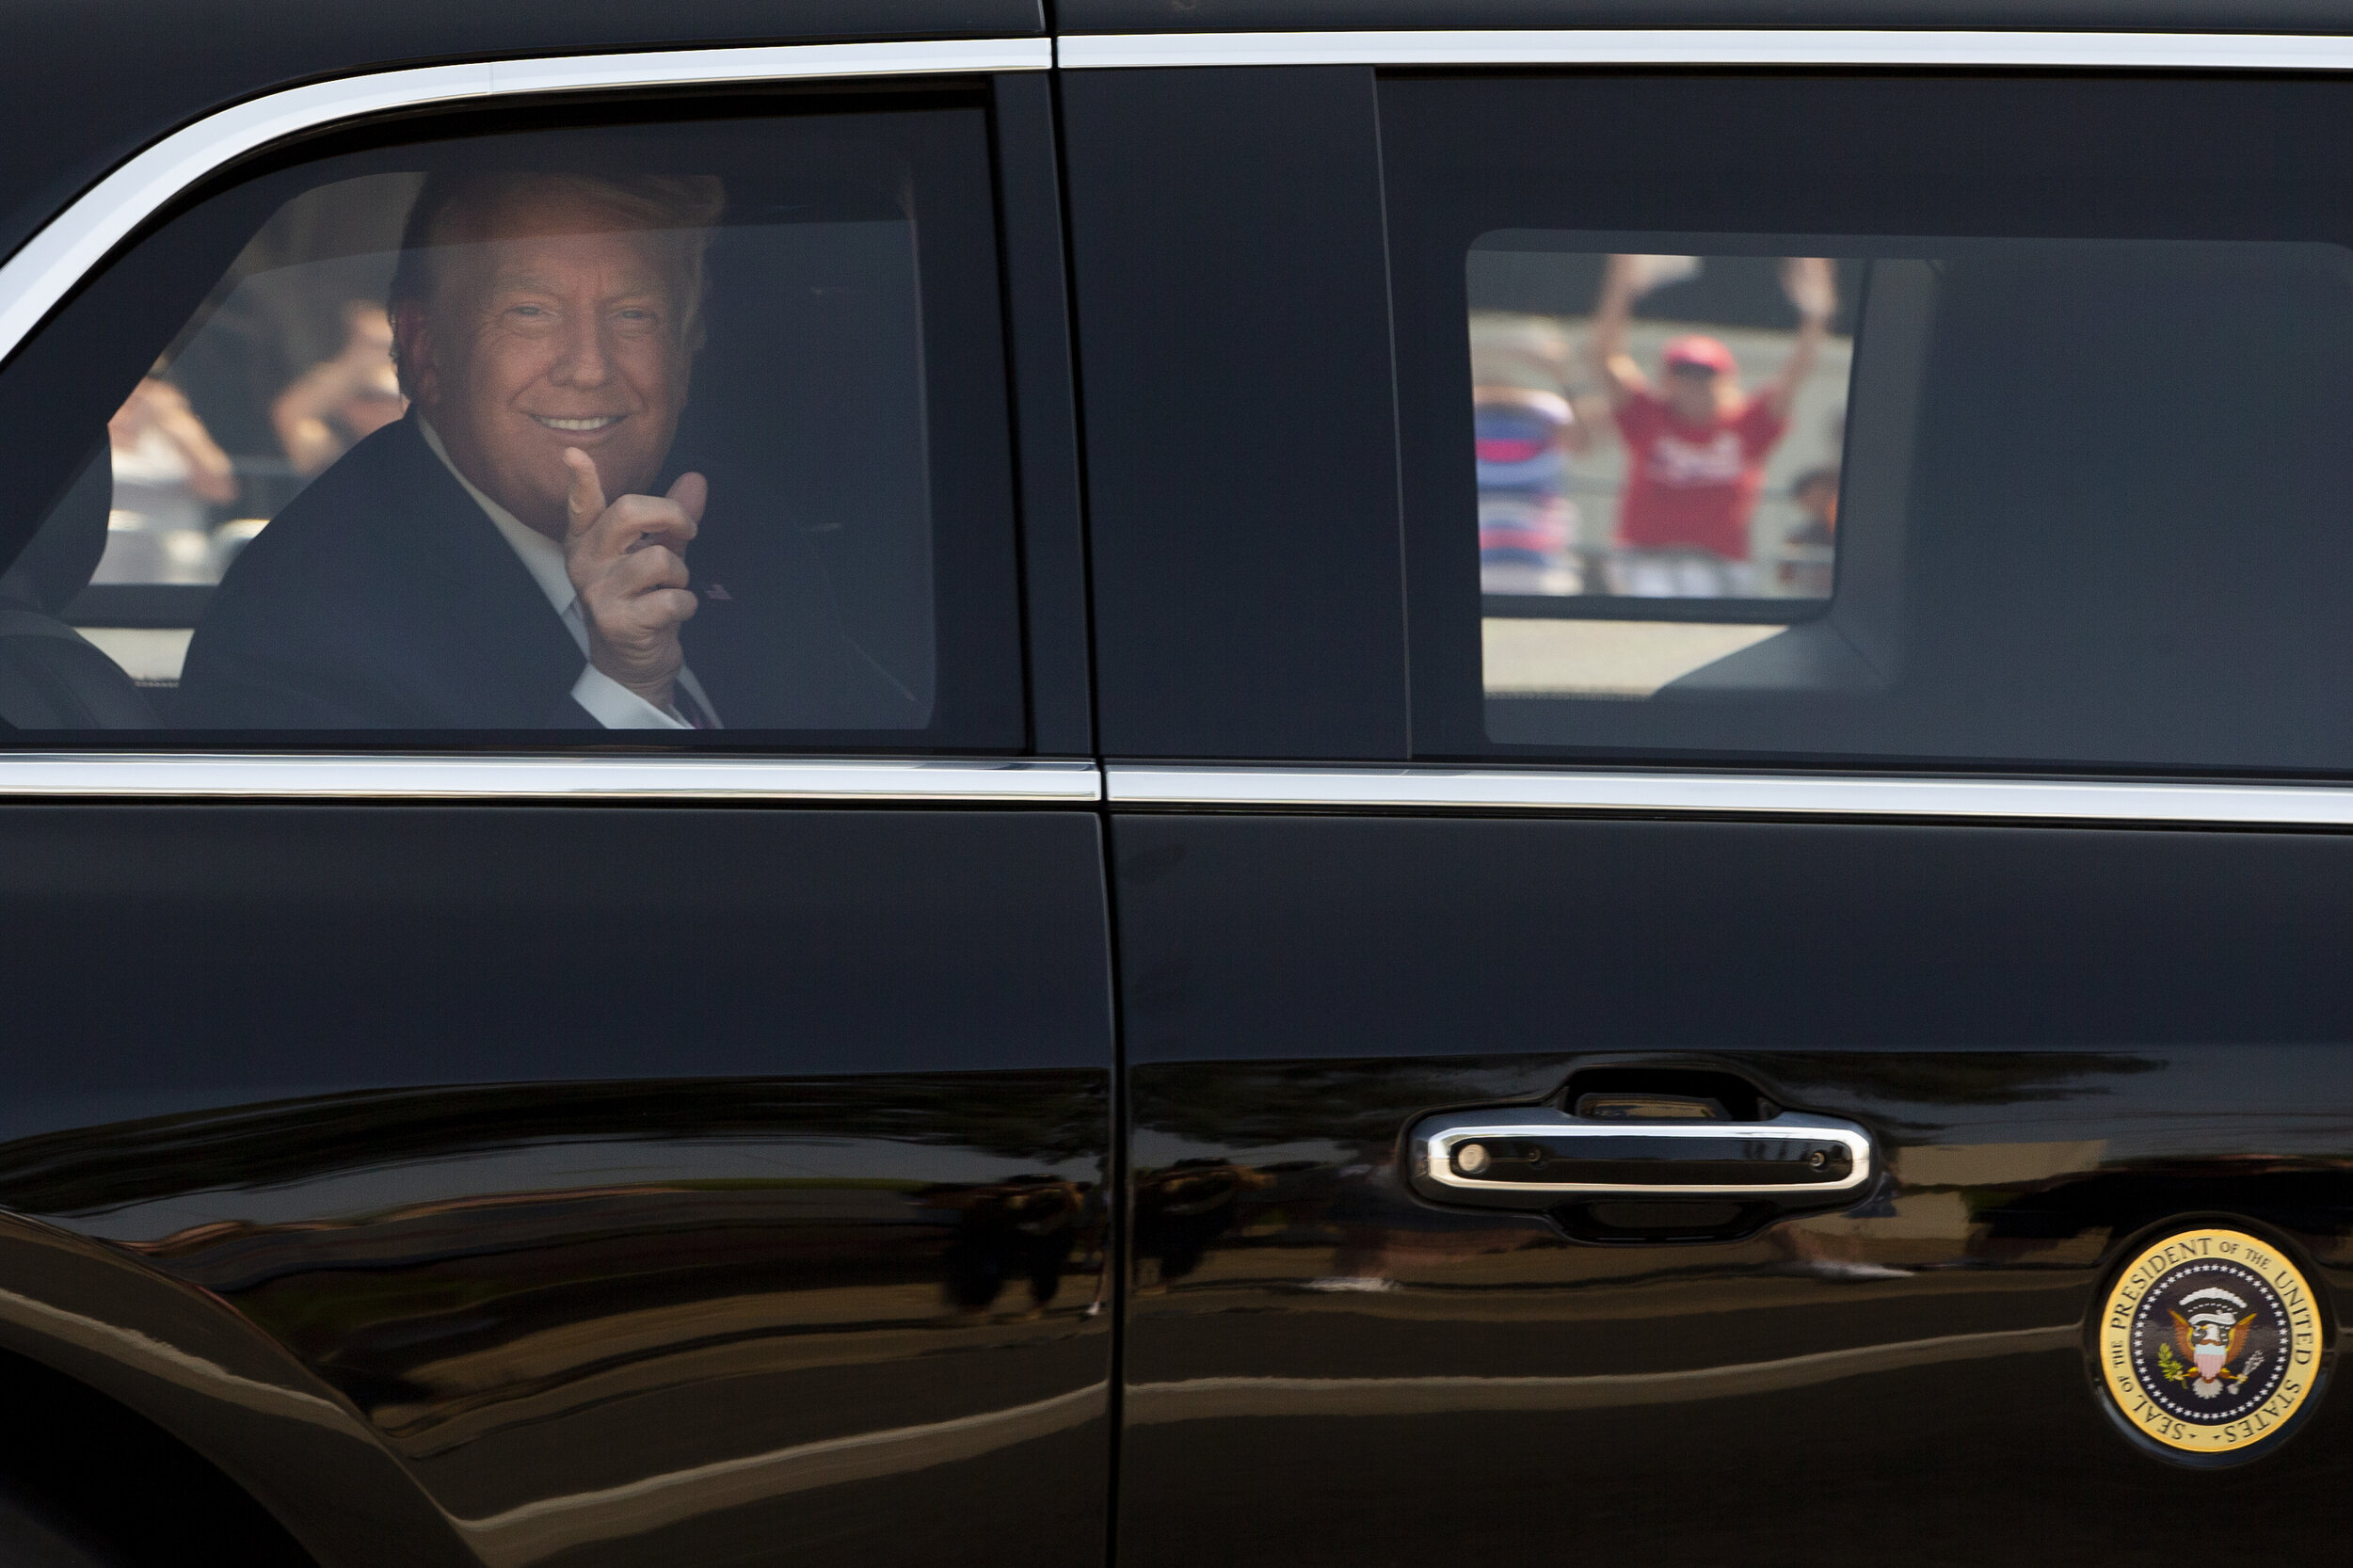  President Donald Trump greets supporters as he arrives at the Arizona Grand Resort to speak at a "Latinos for Trump" roundtable in Phoenix on Sep. 14, 2020. 